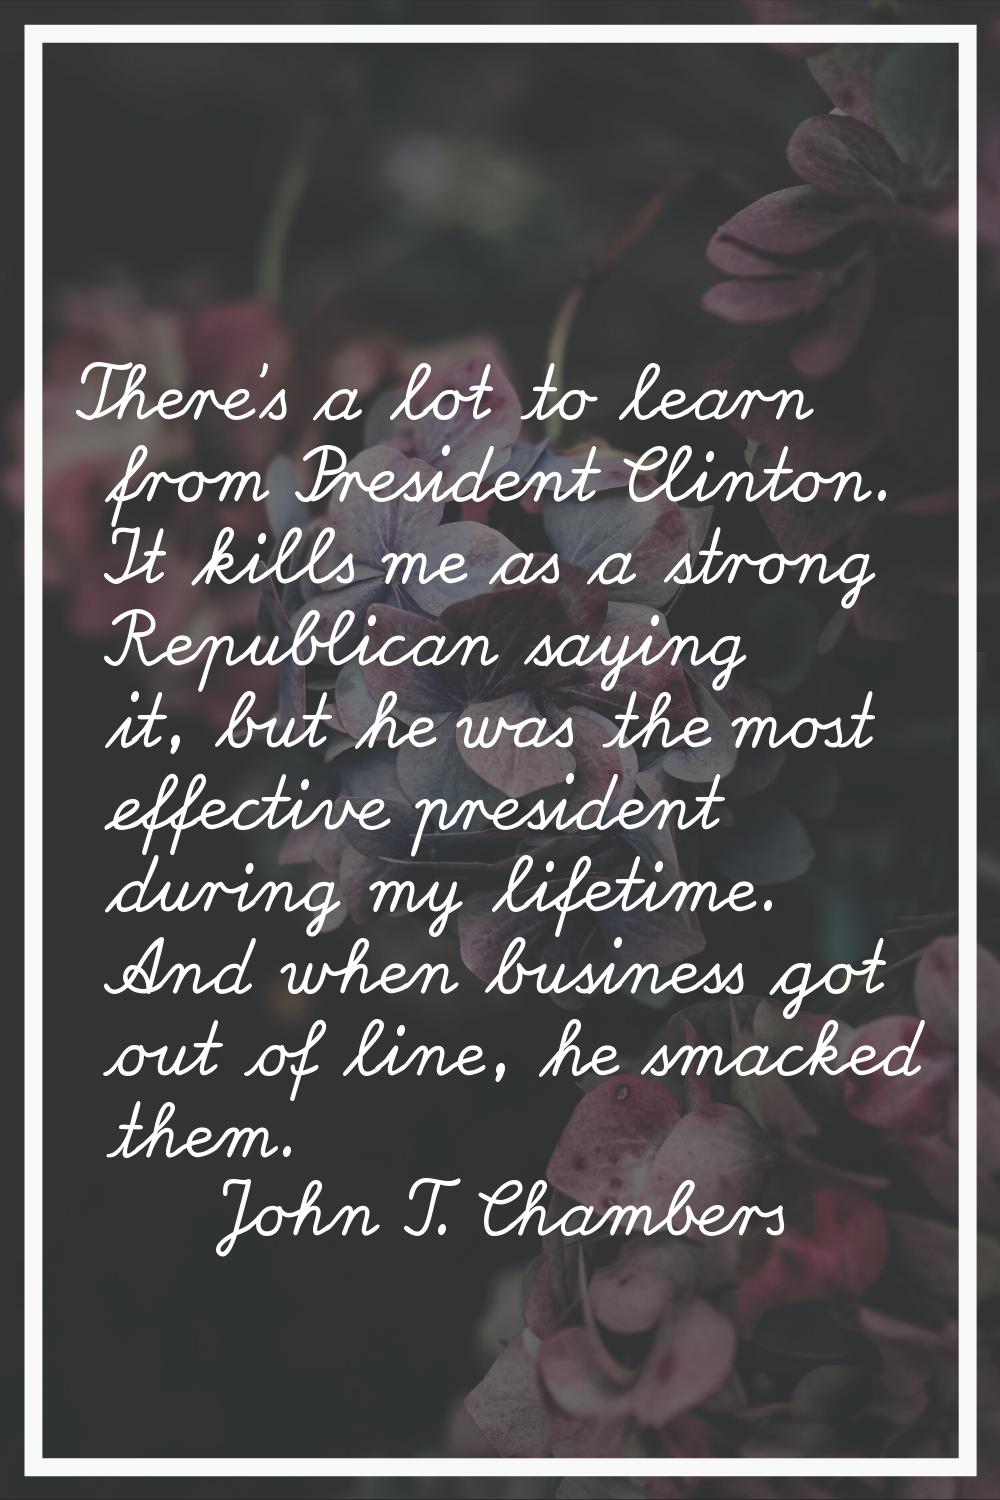 There's a lot to learn from President Clinton. It kills me as a strong Republican saying it, but he